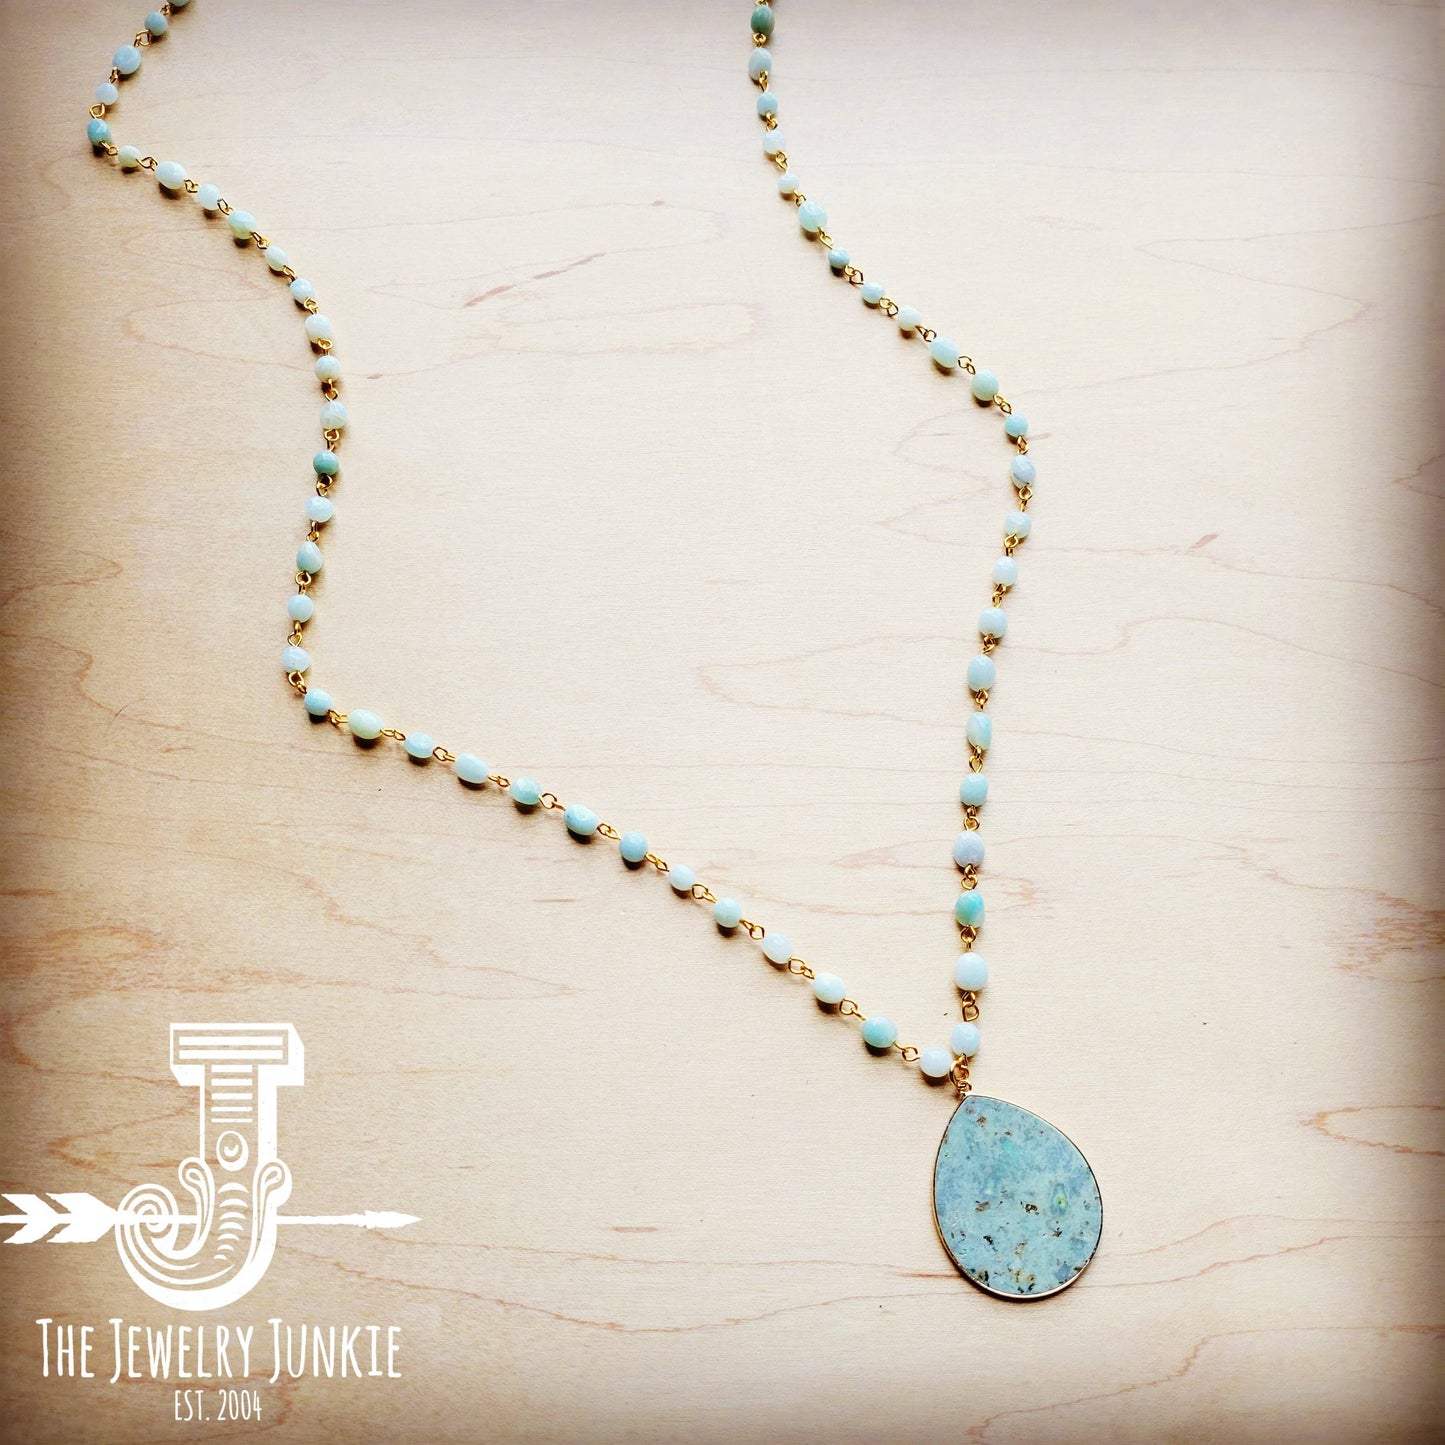 The Jewelry Junkie - Long Amazonite Chain Necklace w/ African Turquoise Pendant